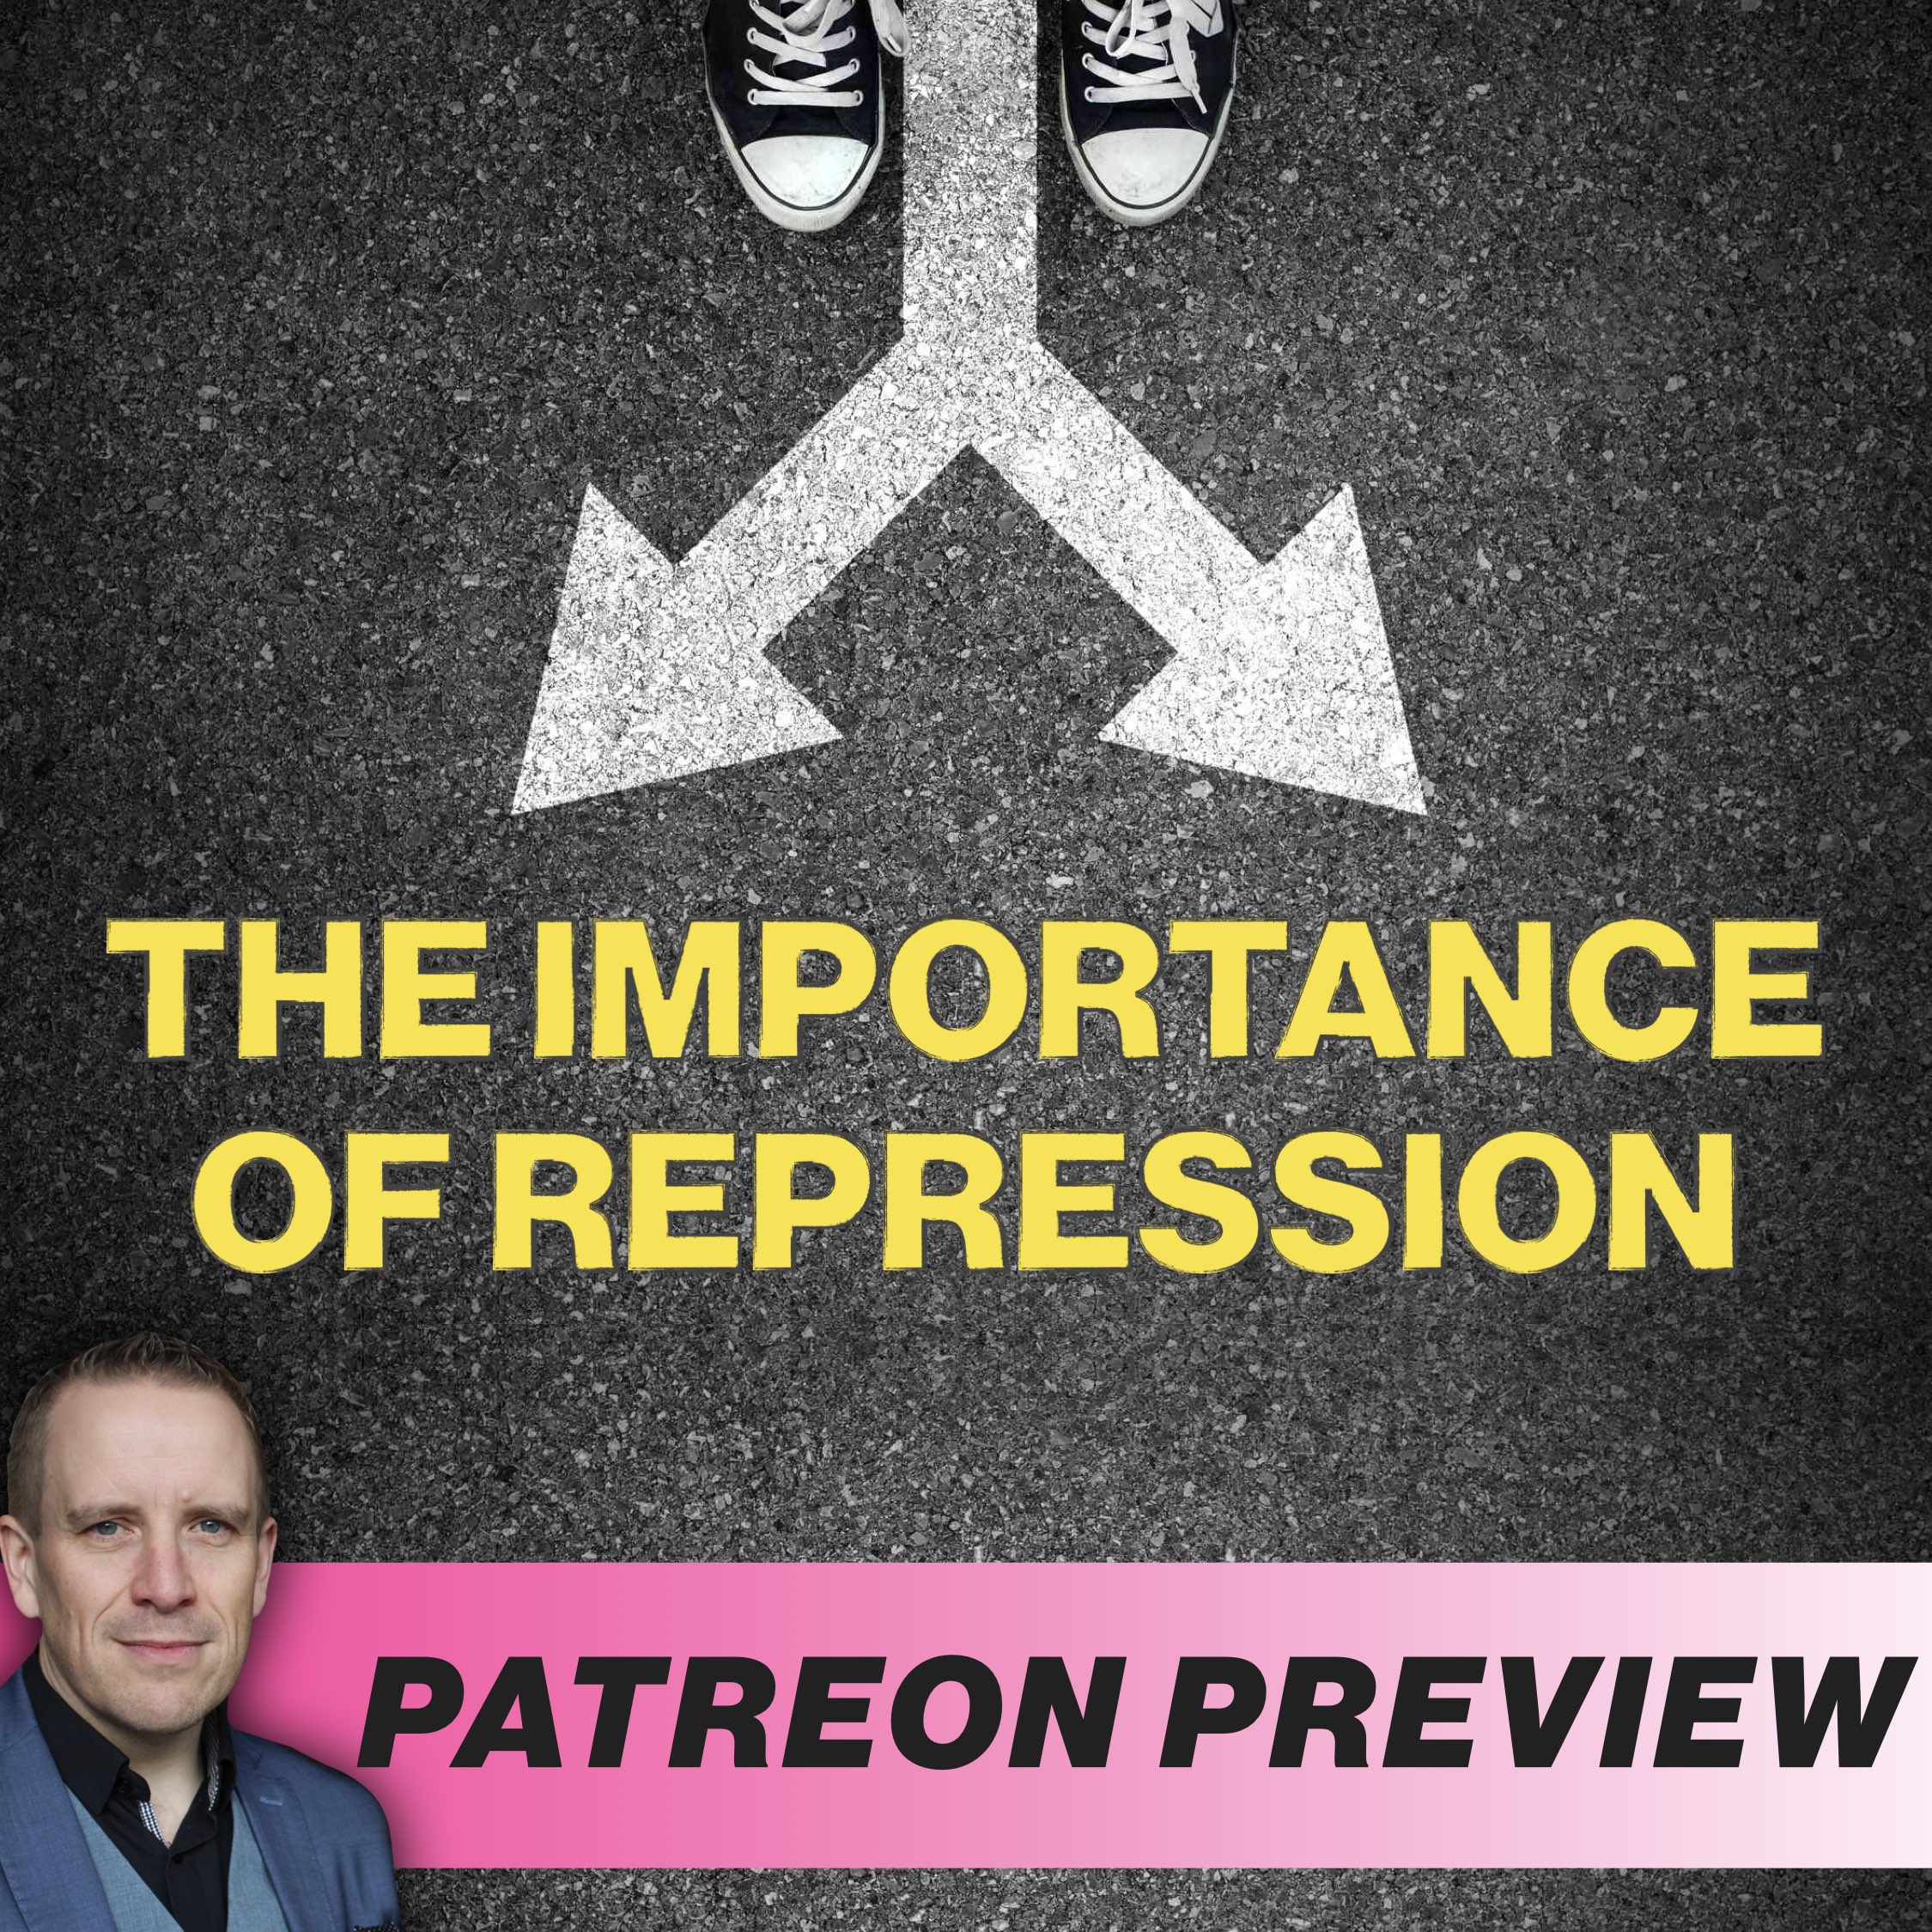 The Importance of Repression (Patreon Preview)